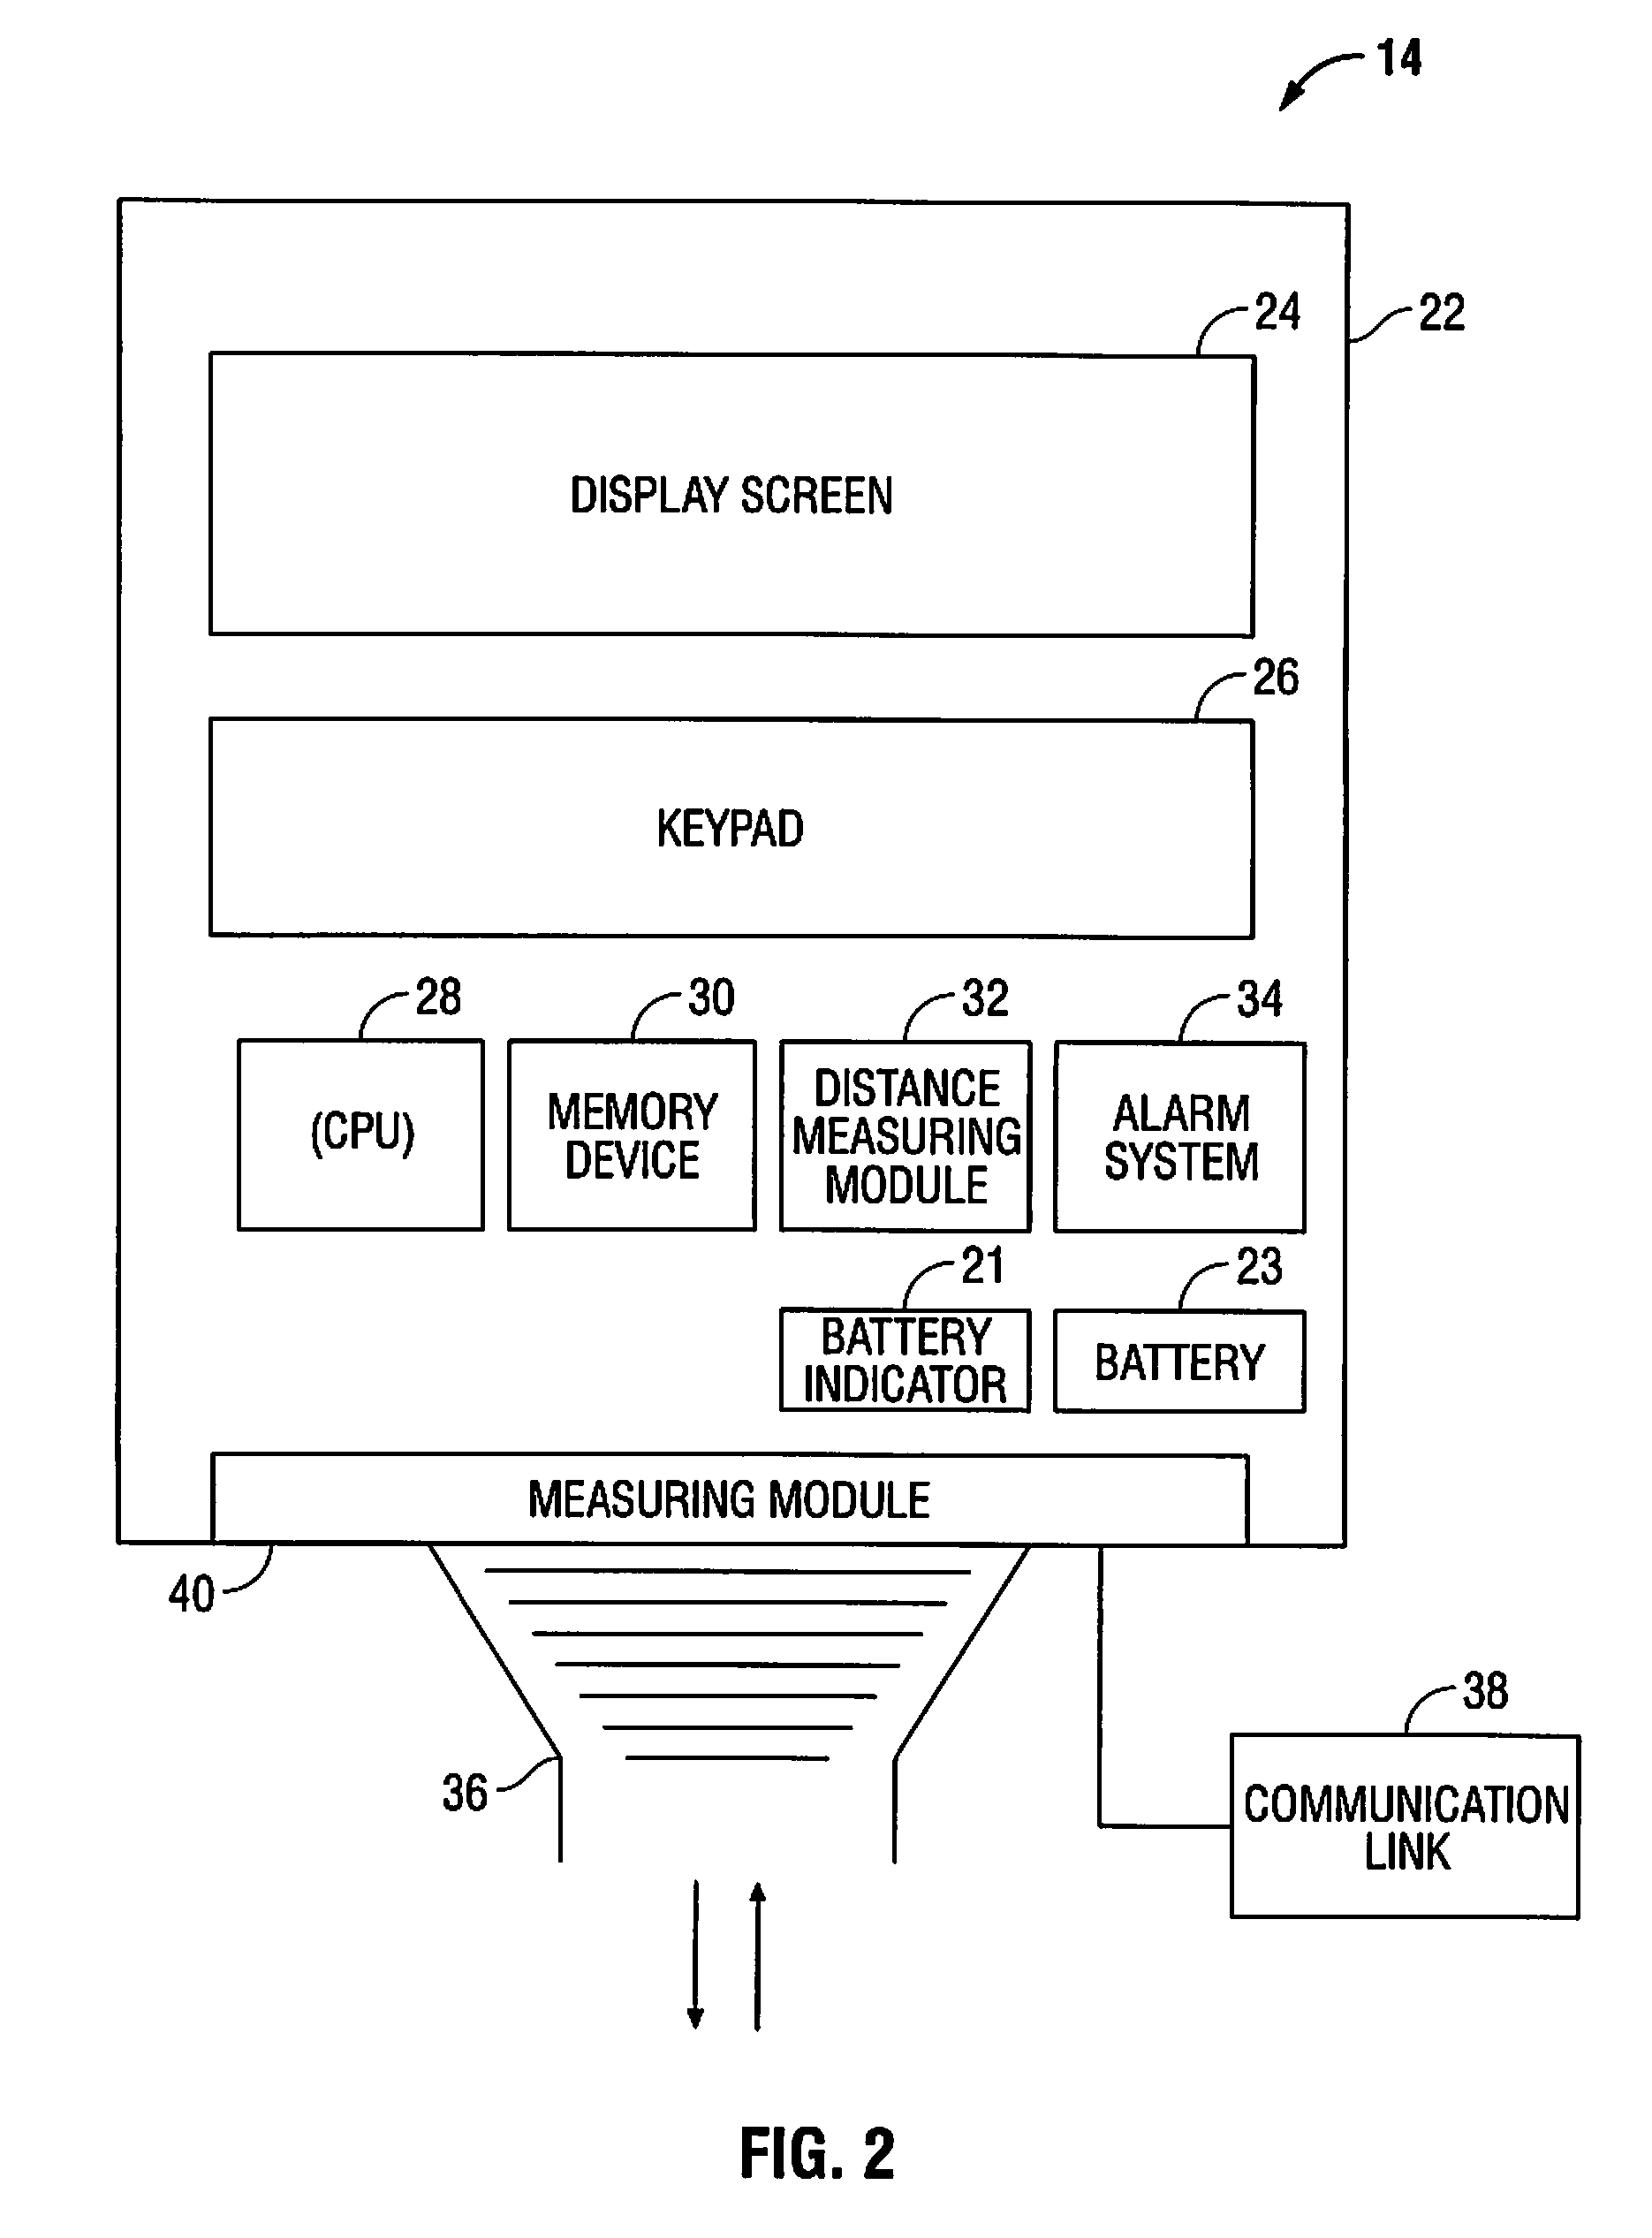 Oil heating tank meter for monitoring a plurality of variables